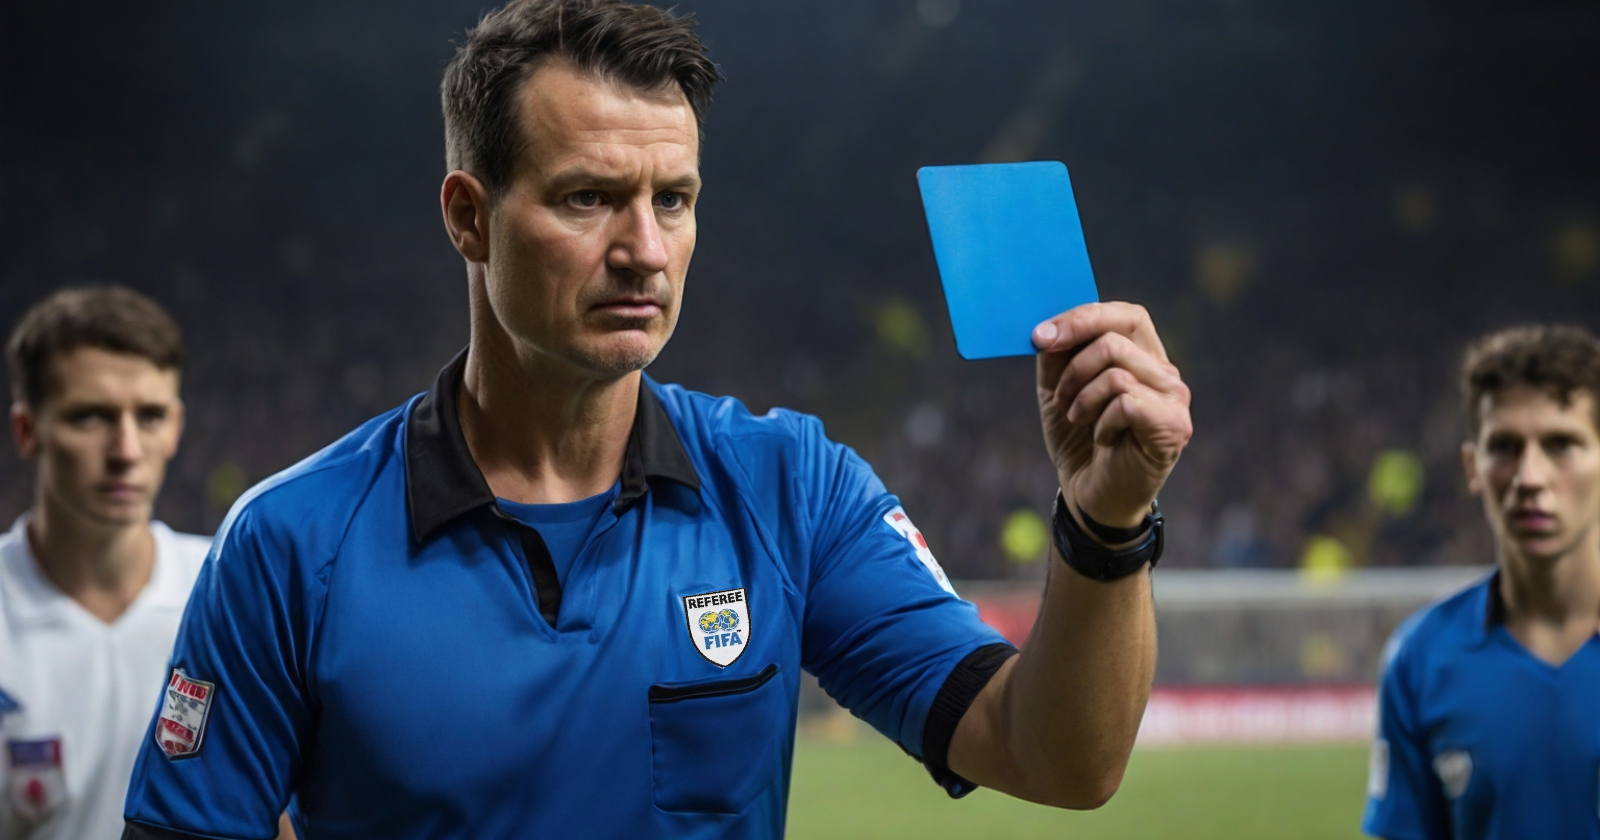 The “Blue Card” era in football! Here are the details